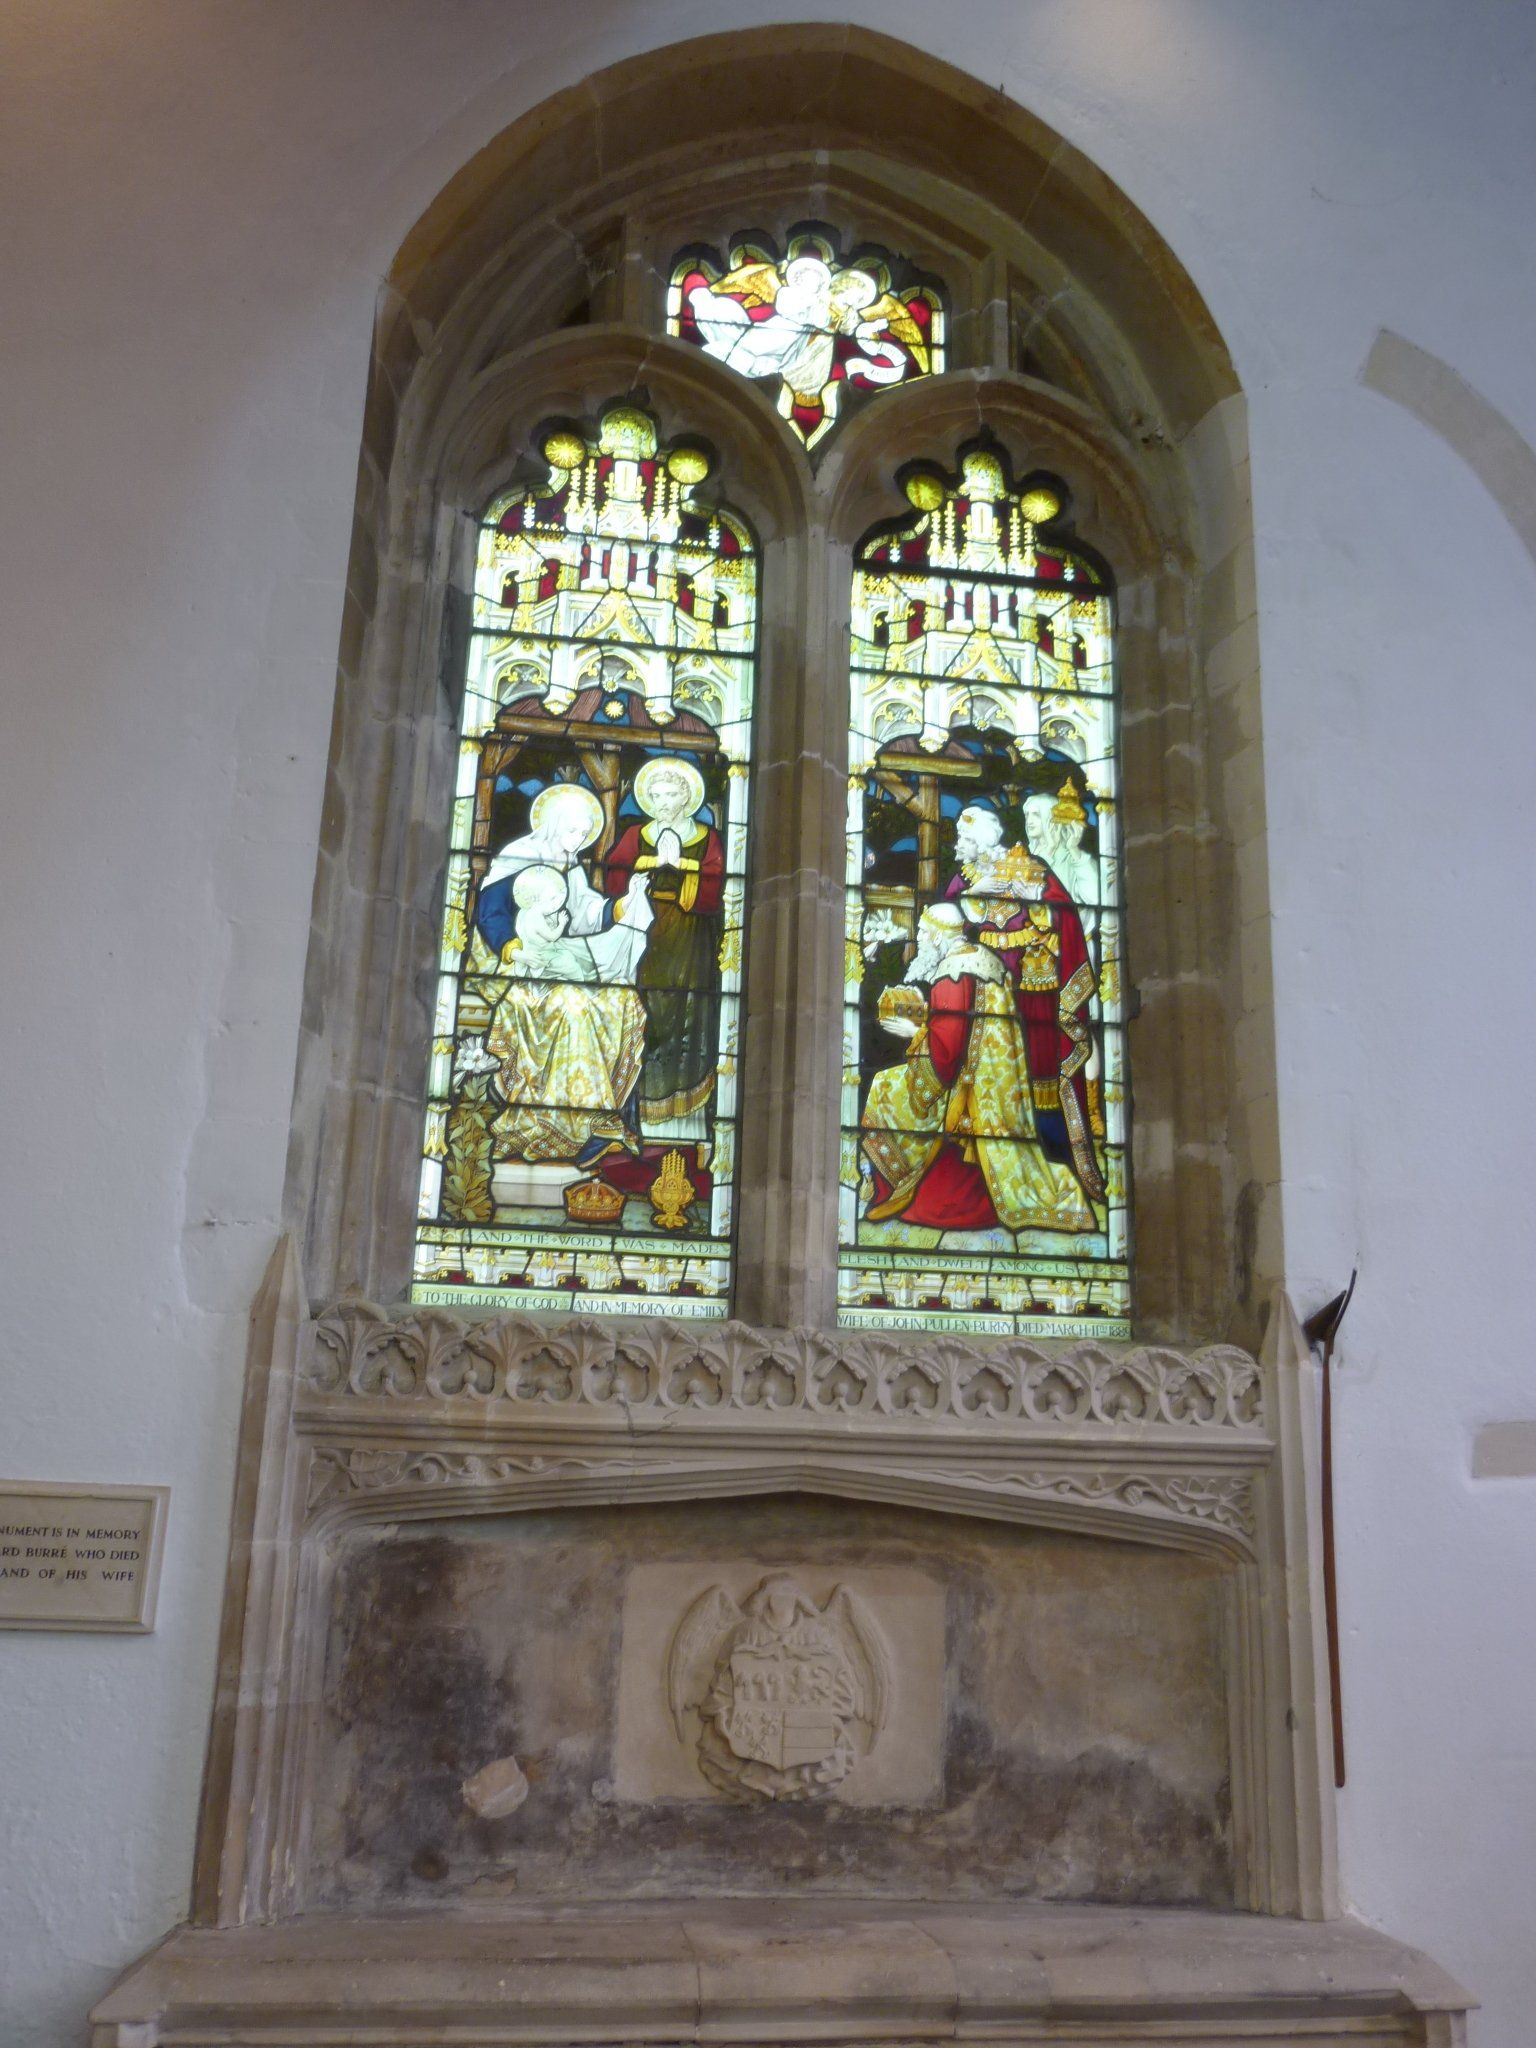 Nativity window and monument (St Mary's Church, Sompting)